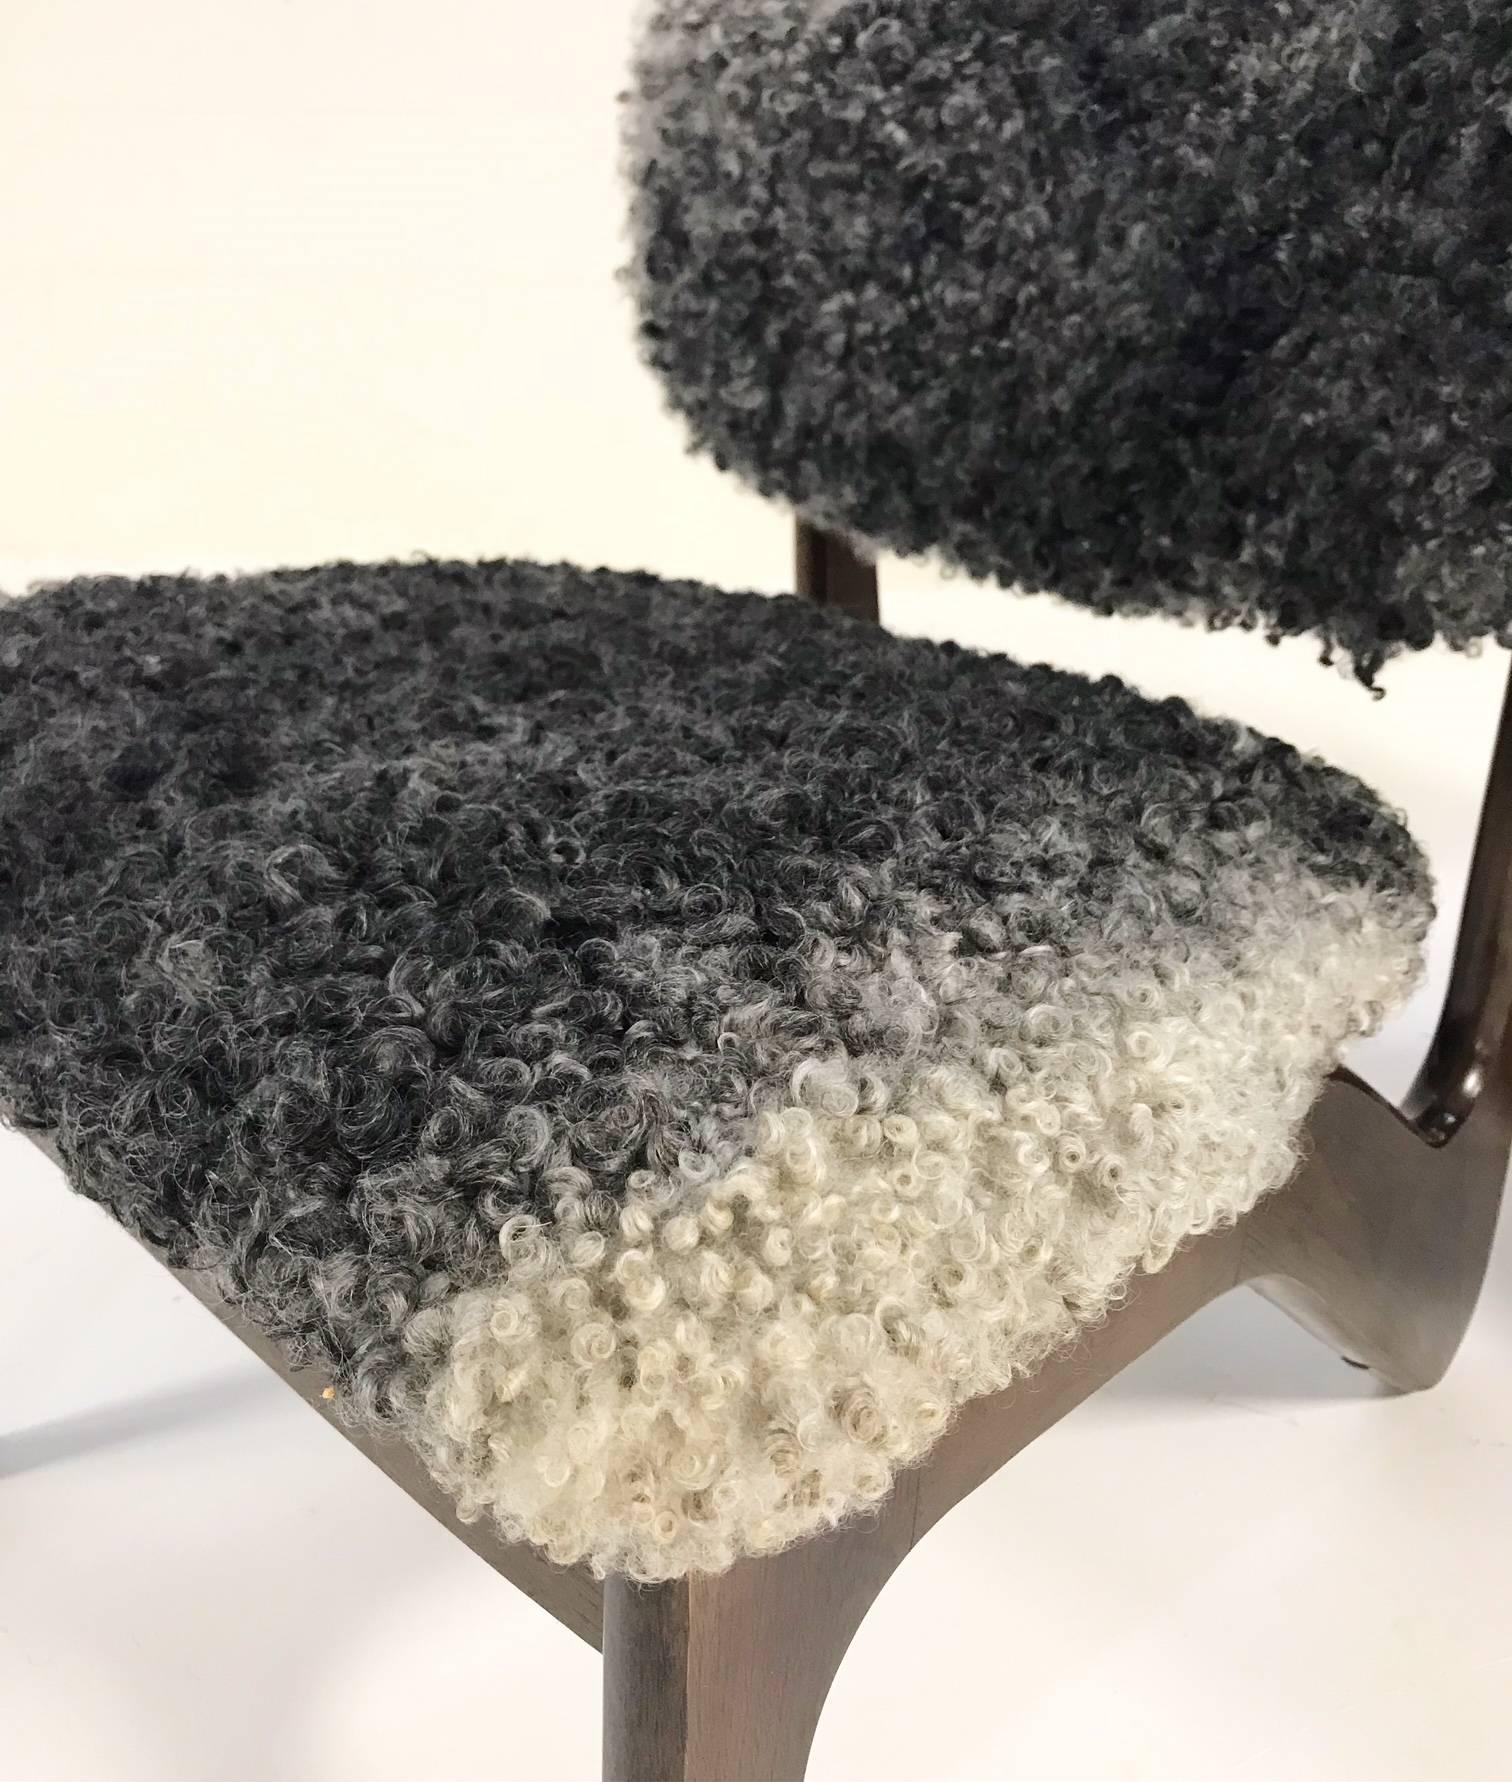 We love the look of these lounge chairs, in the style of the sculptural designs of Adrian Pearsall. A great look from every angle! For their restoration, our designers chose the beautifully soft Gotland sheepskin to bring out the warm wood tones of